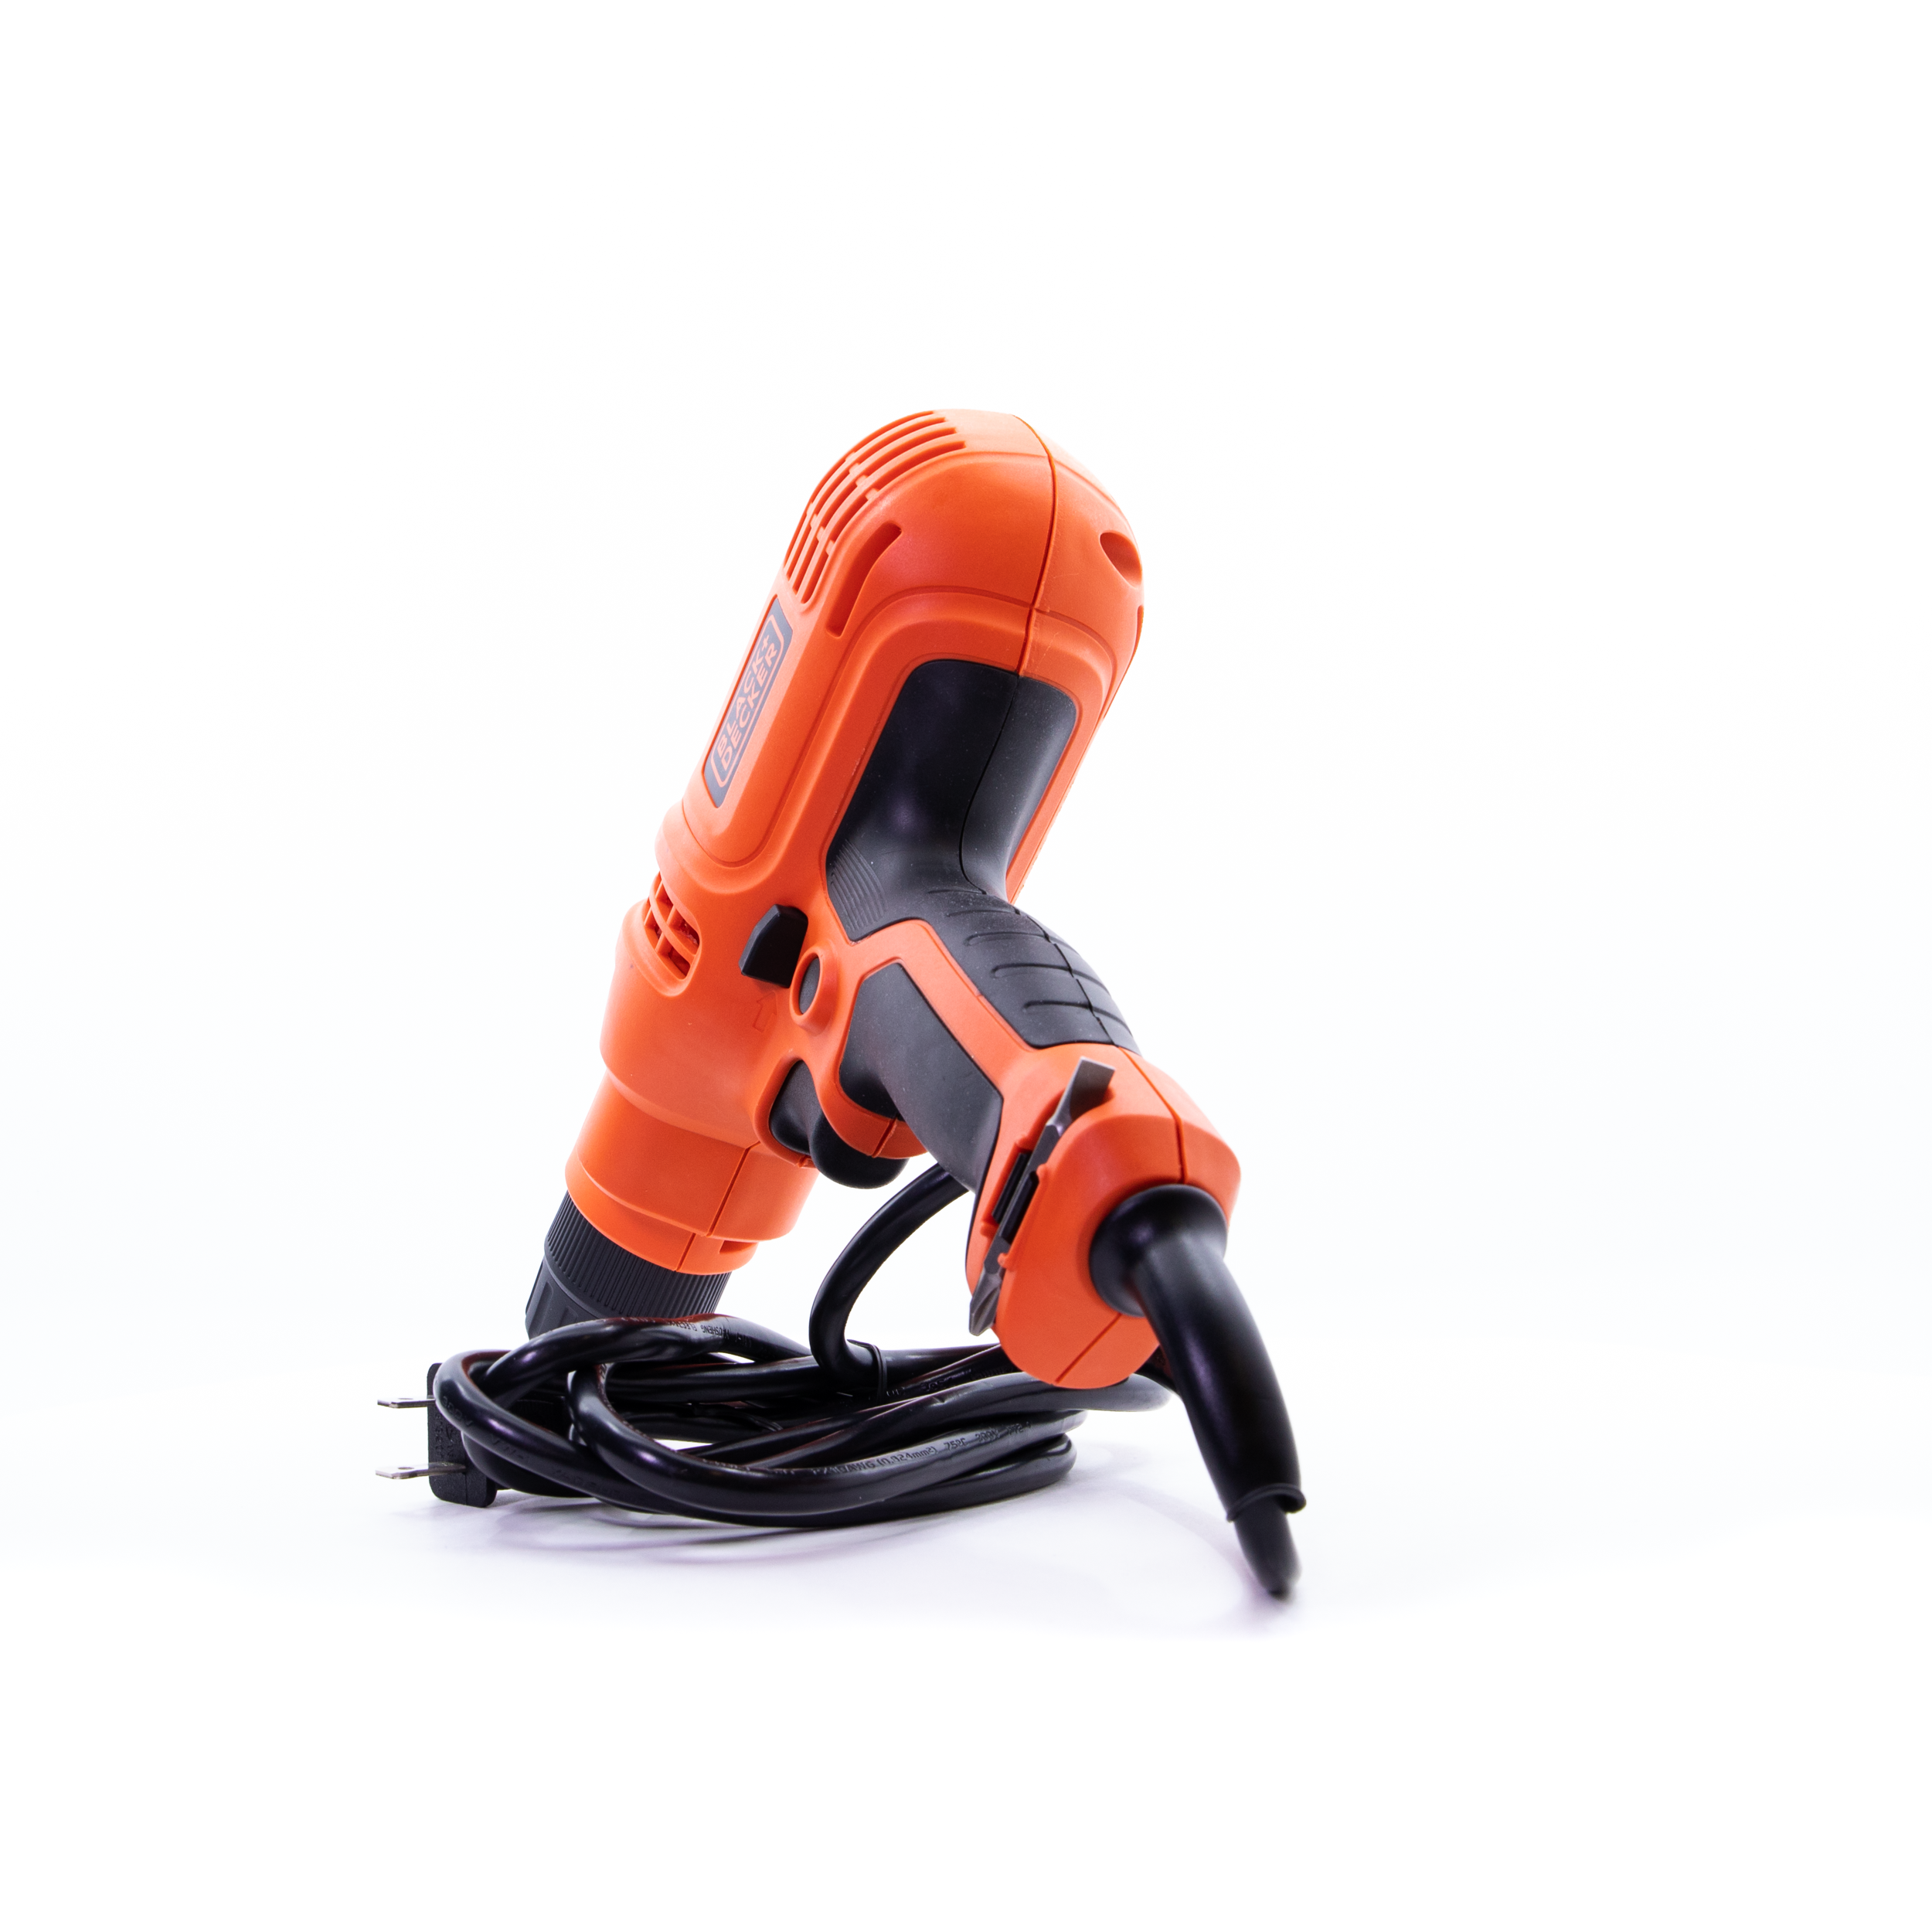 BLACK & DECKER 5.2-Amp 3/8-in Corded Drill at